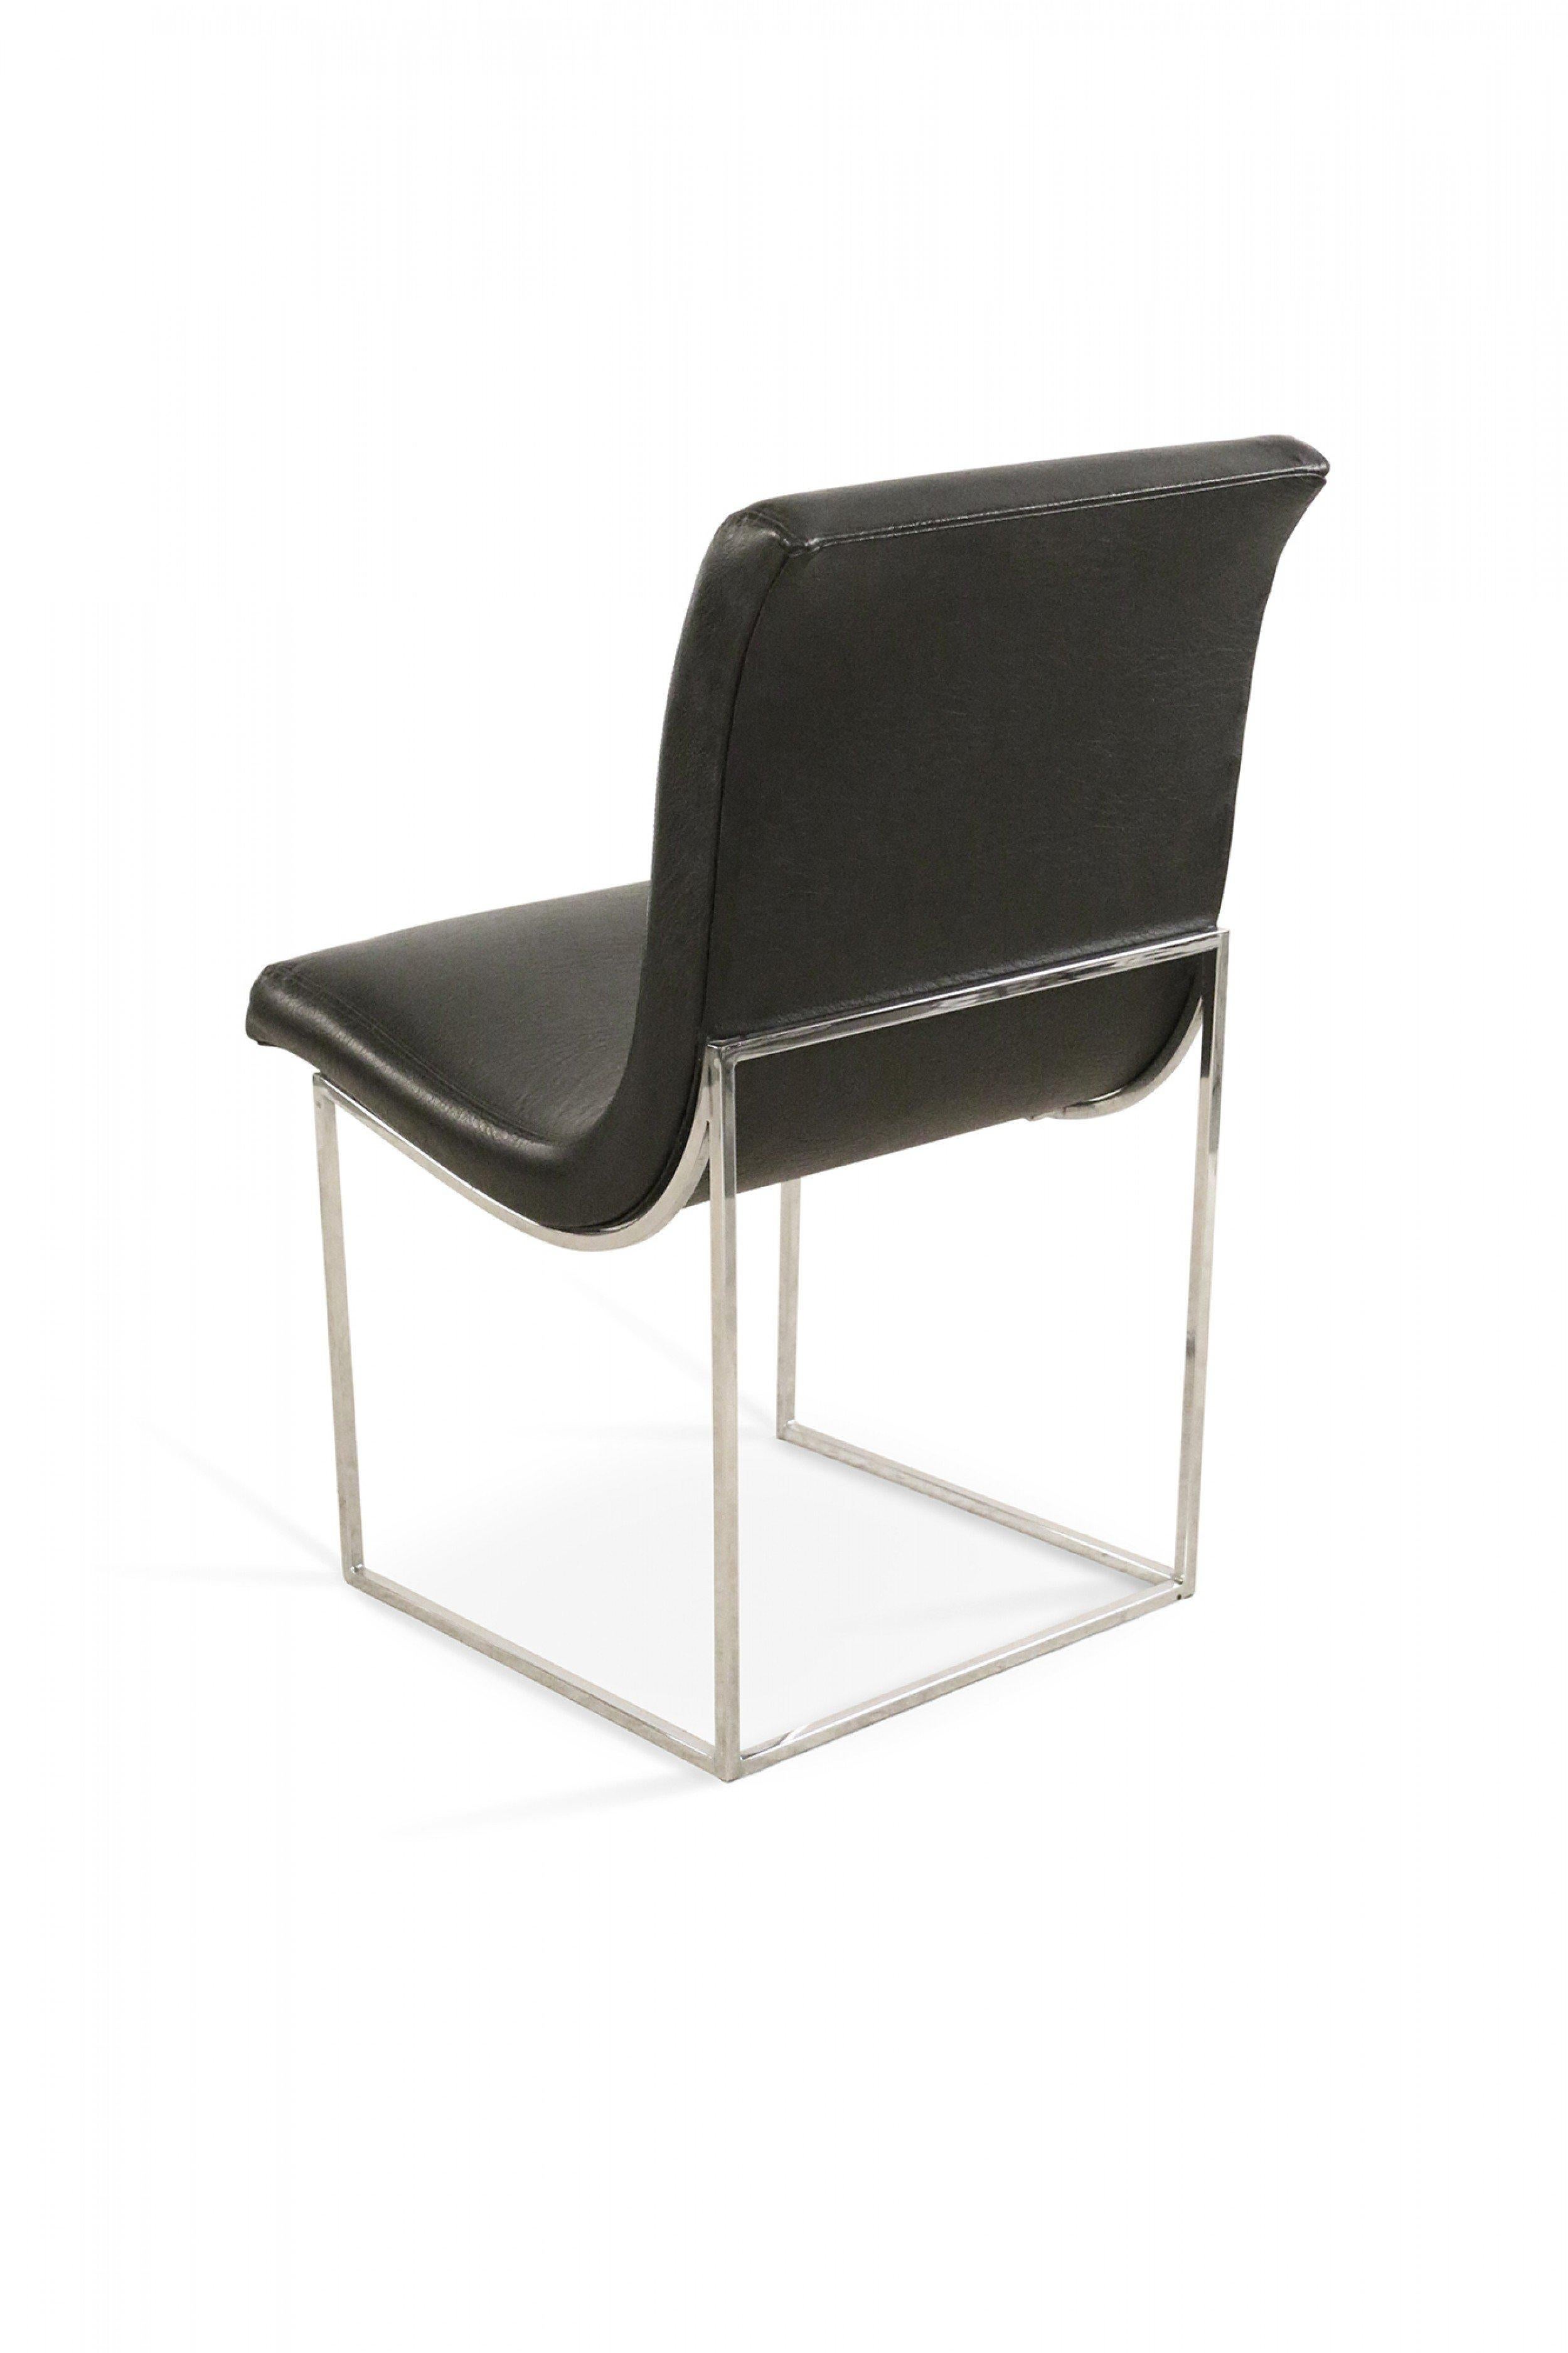 Mid-Century Milo Baughman Chrome and Black Vinyl Dining Chairs For Sale 2